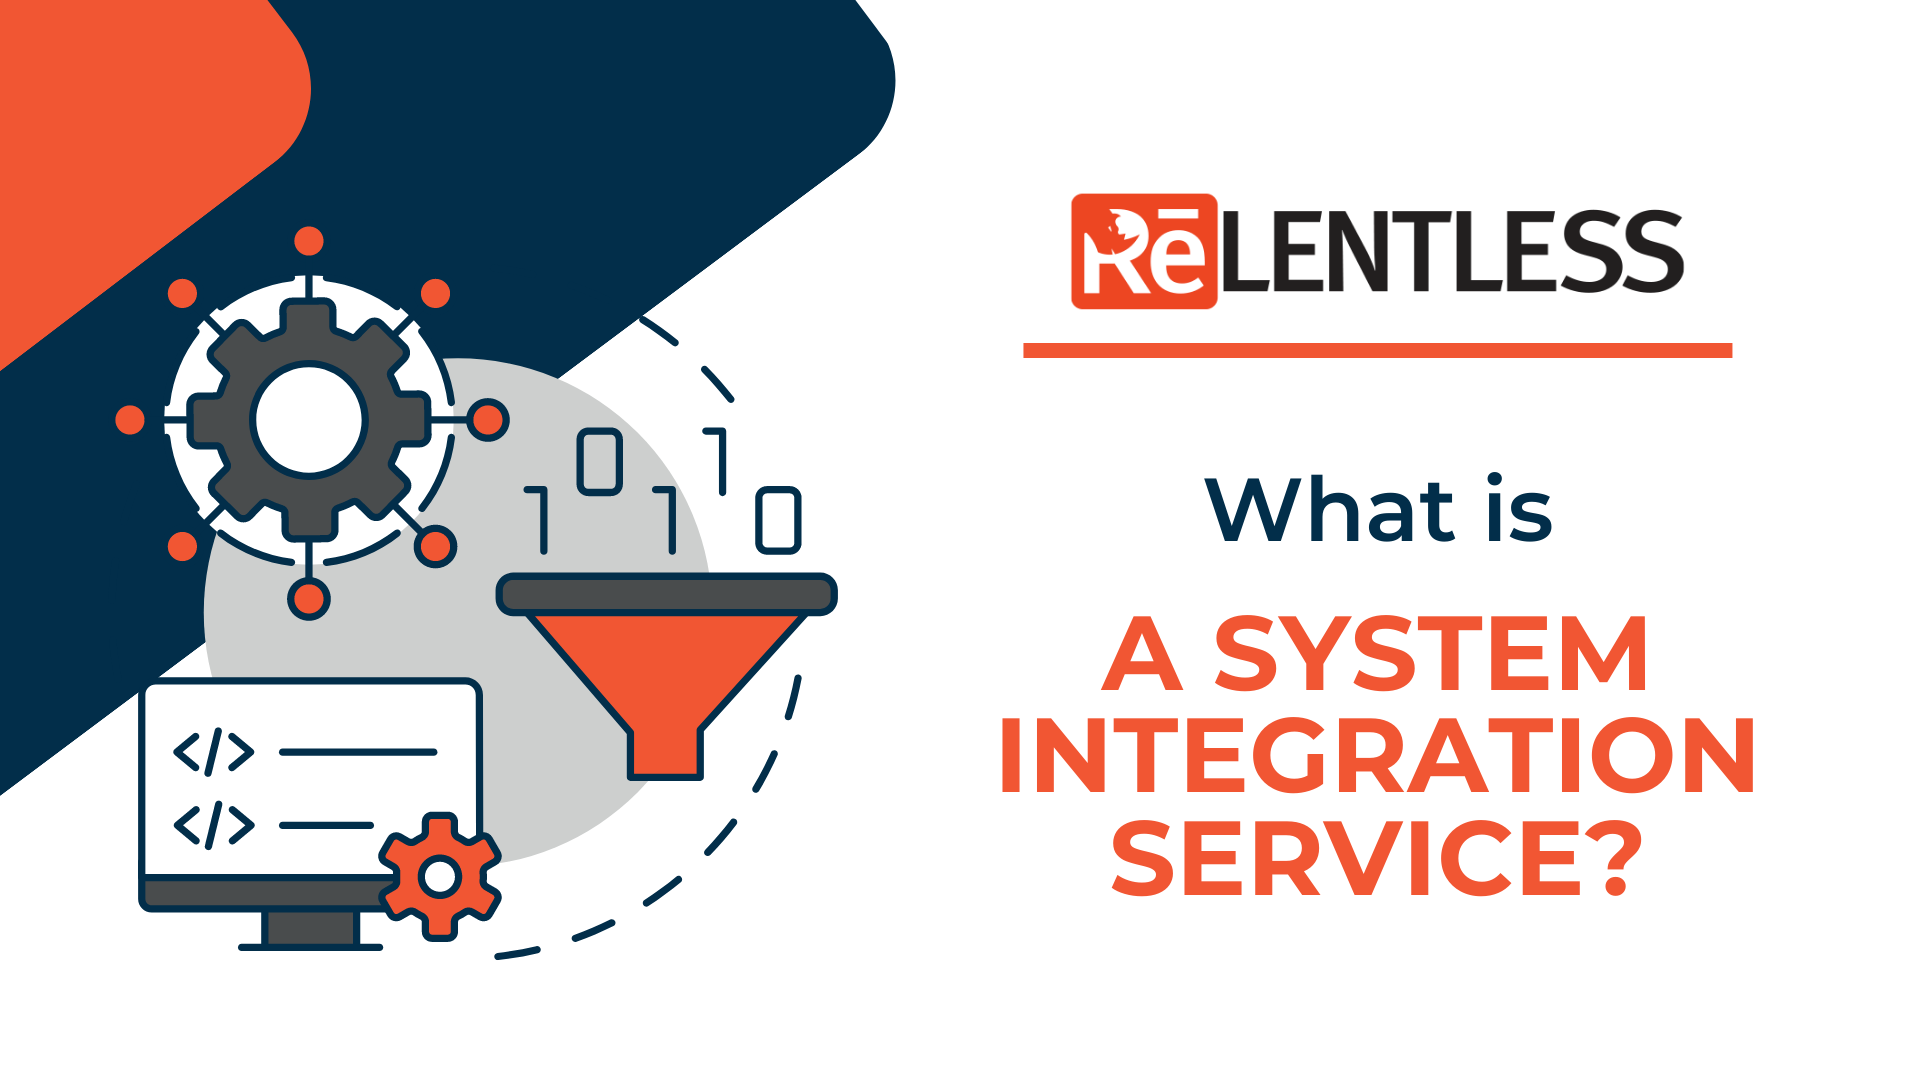 What is a System Integration Service